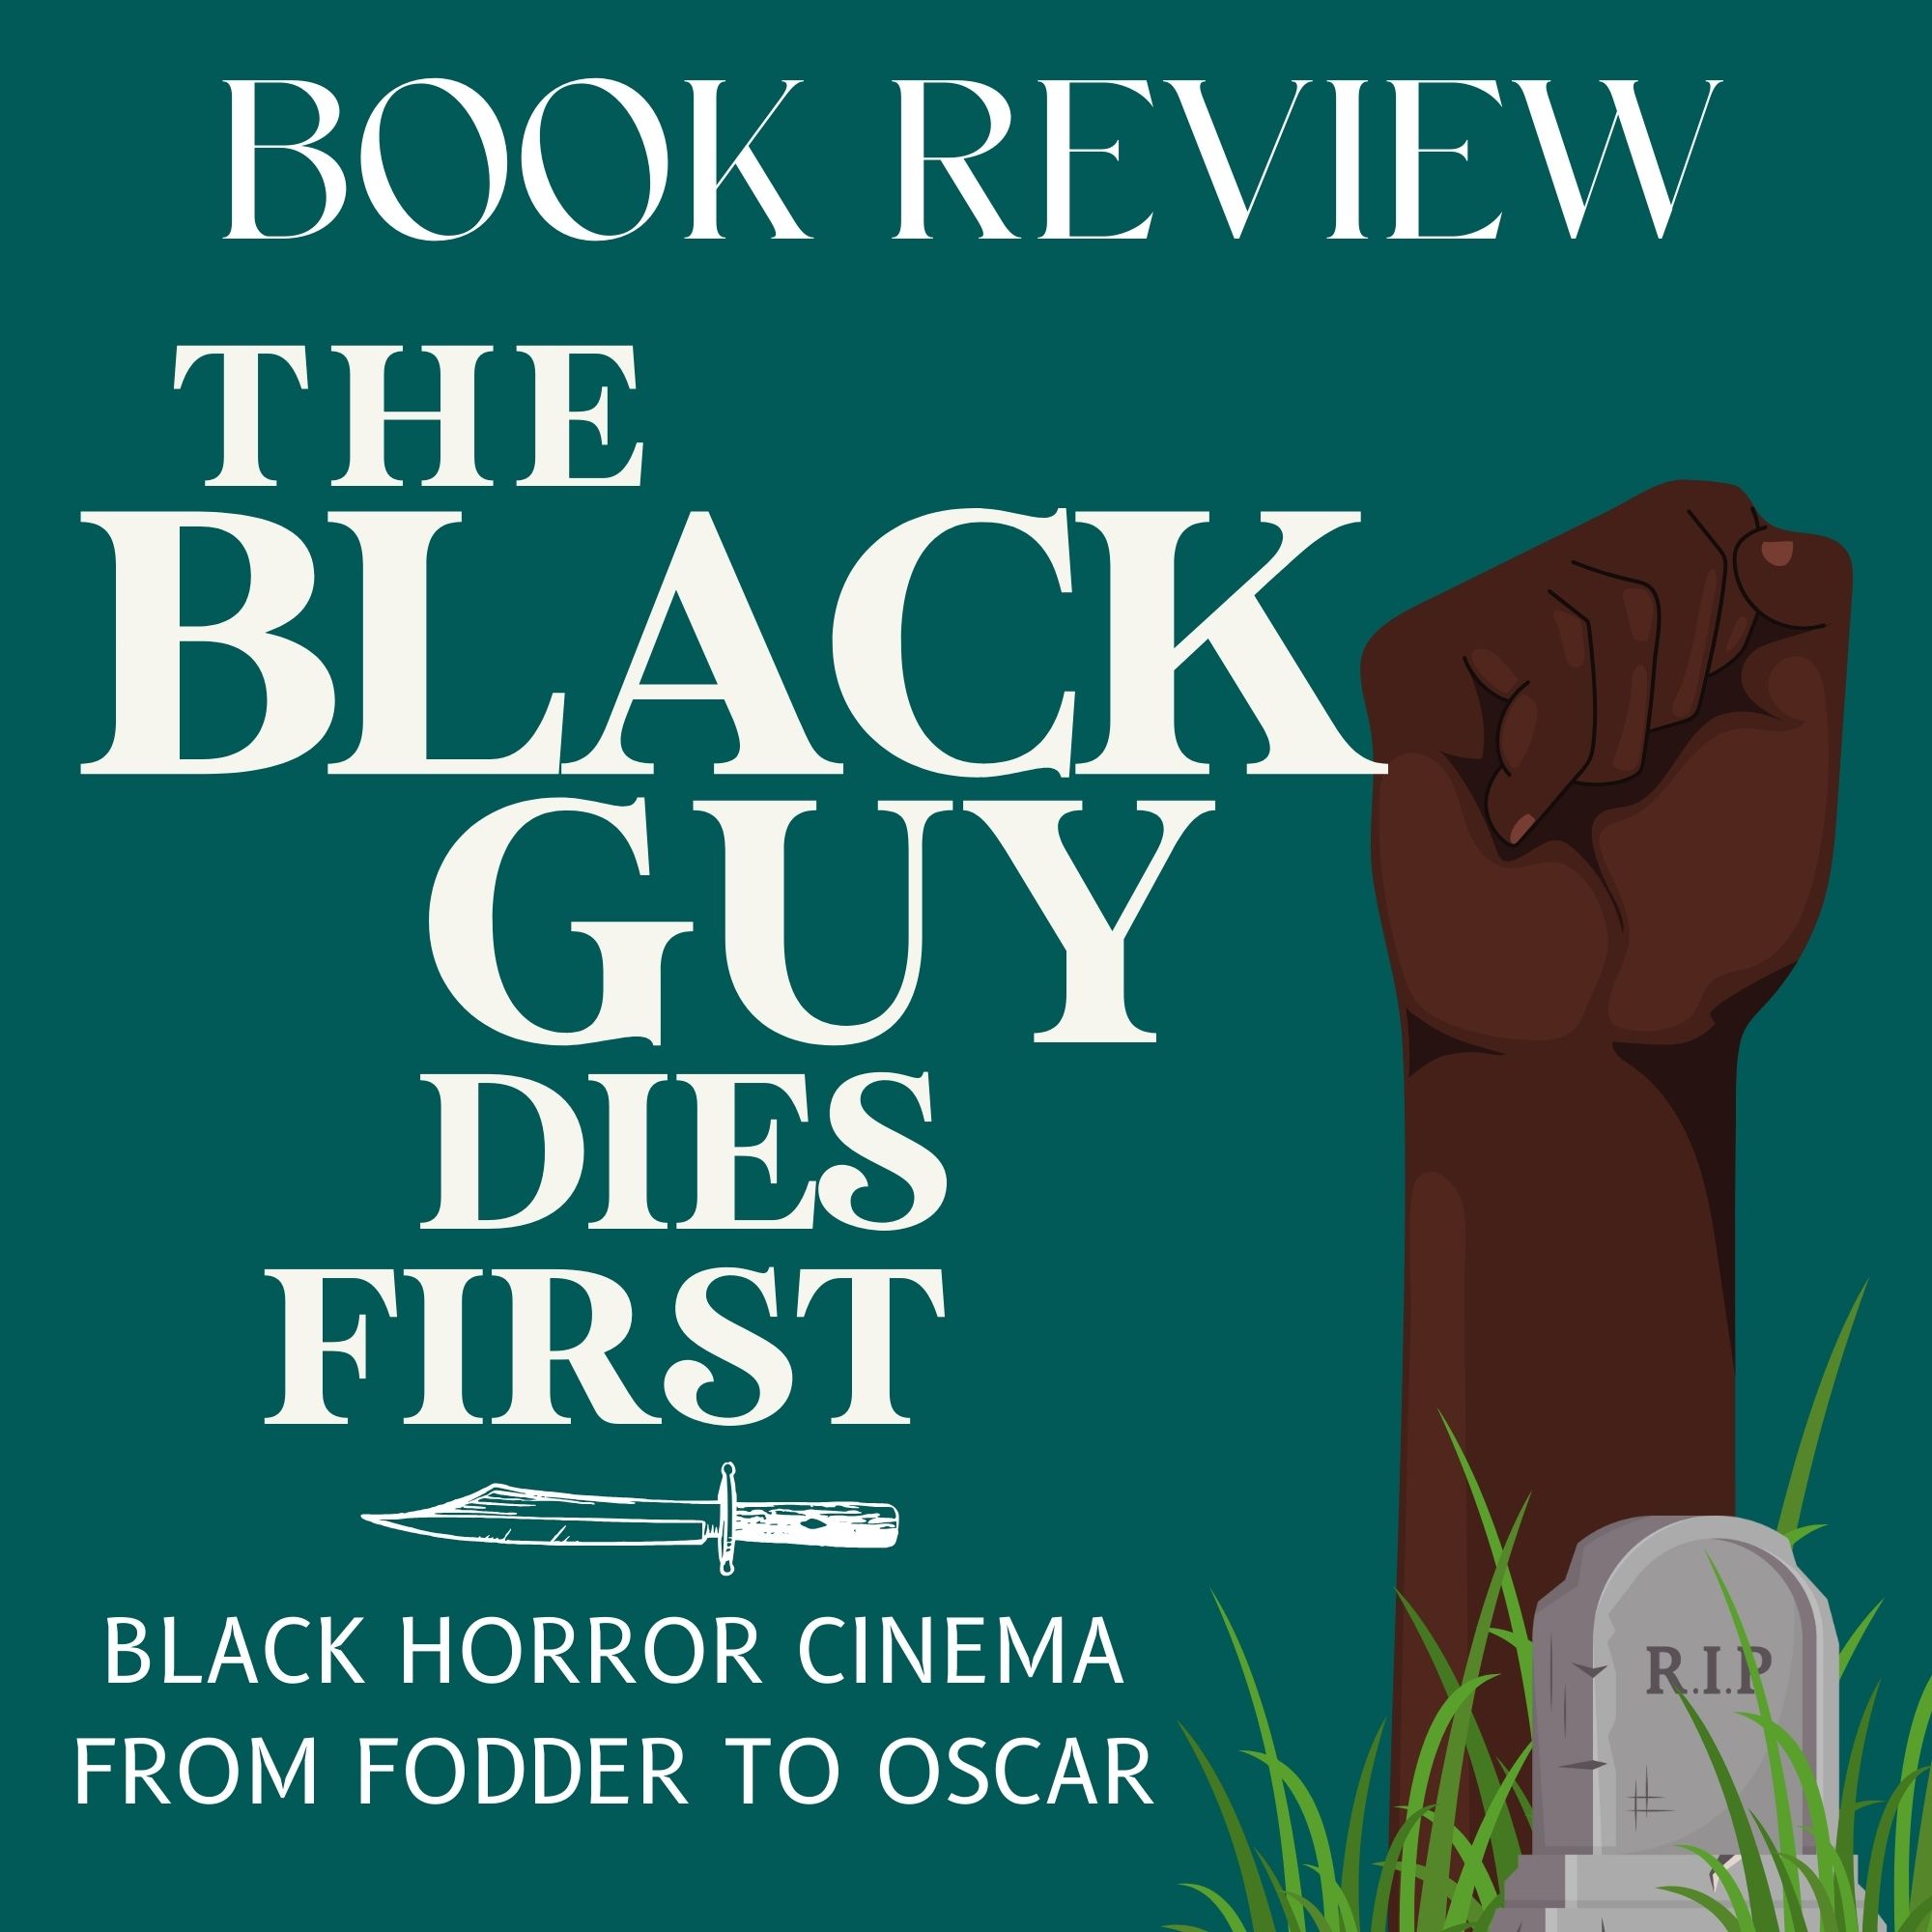 Good Reads Challenge Book Review:  The Black Guy Dies First: Black Horror Cinema from Fodder to Oscar